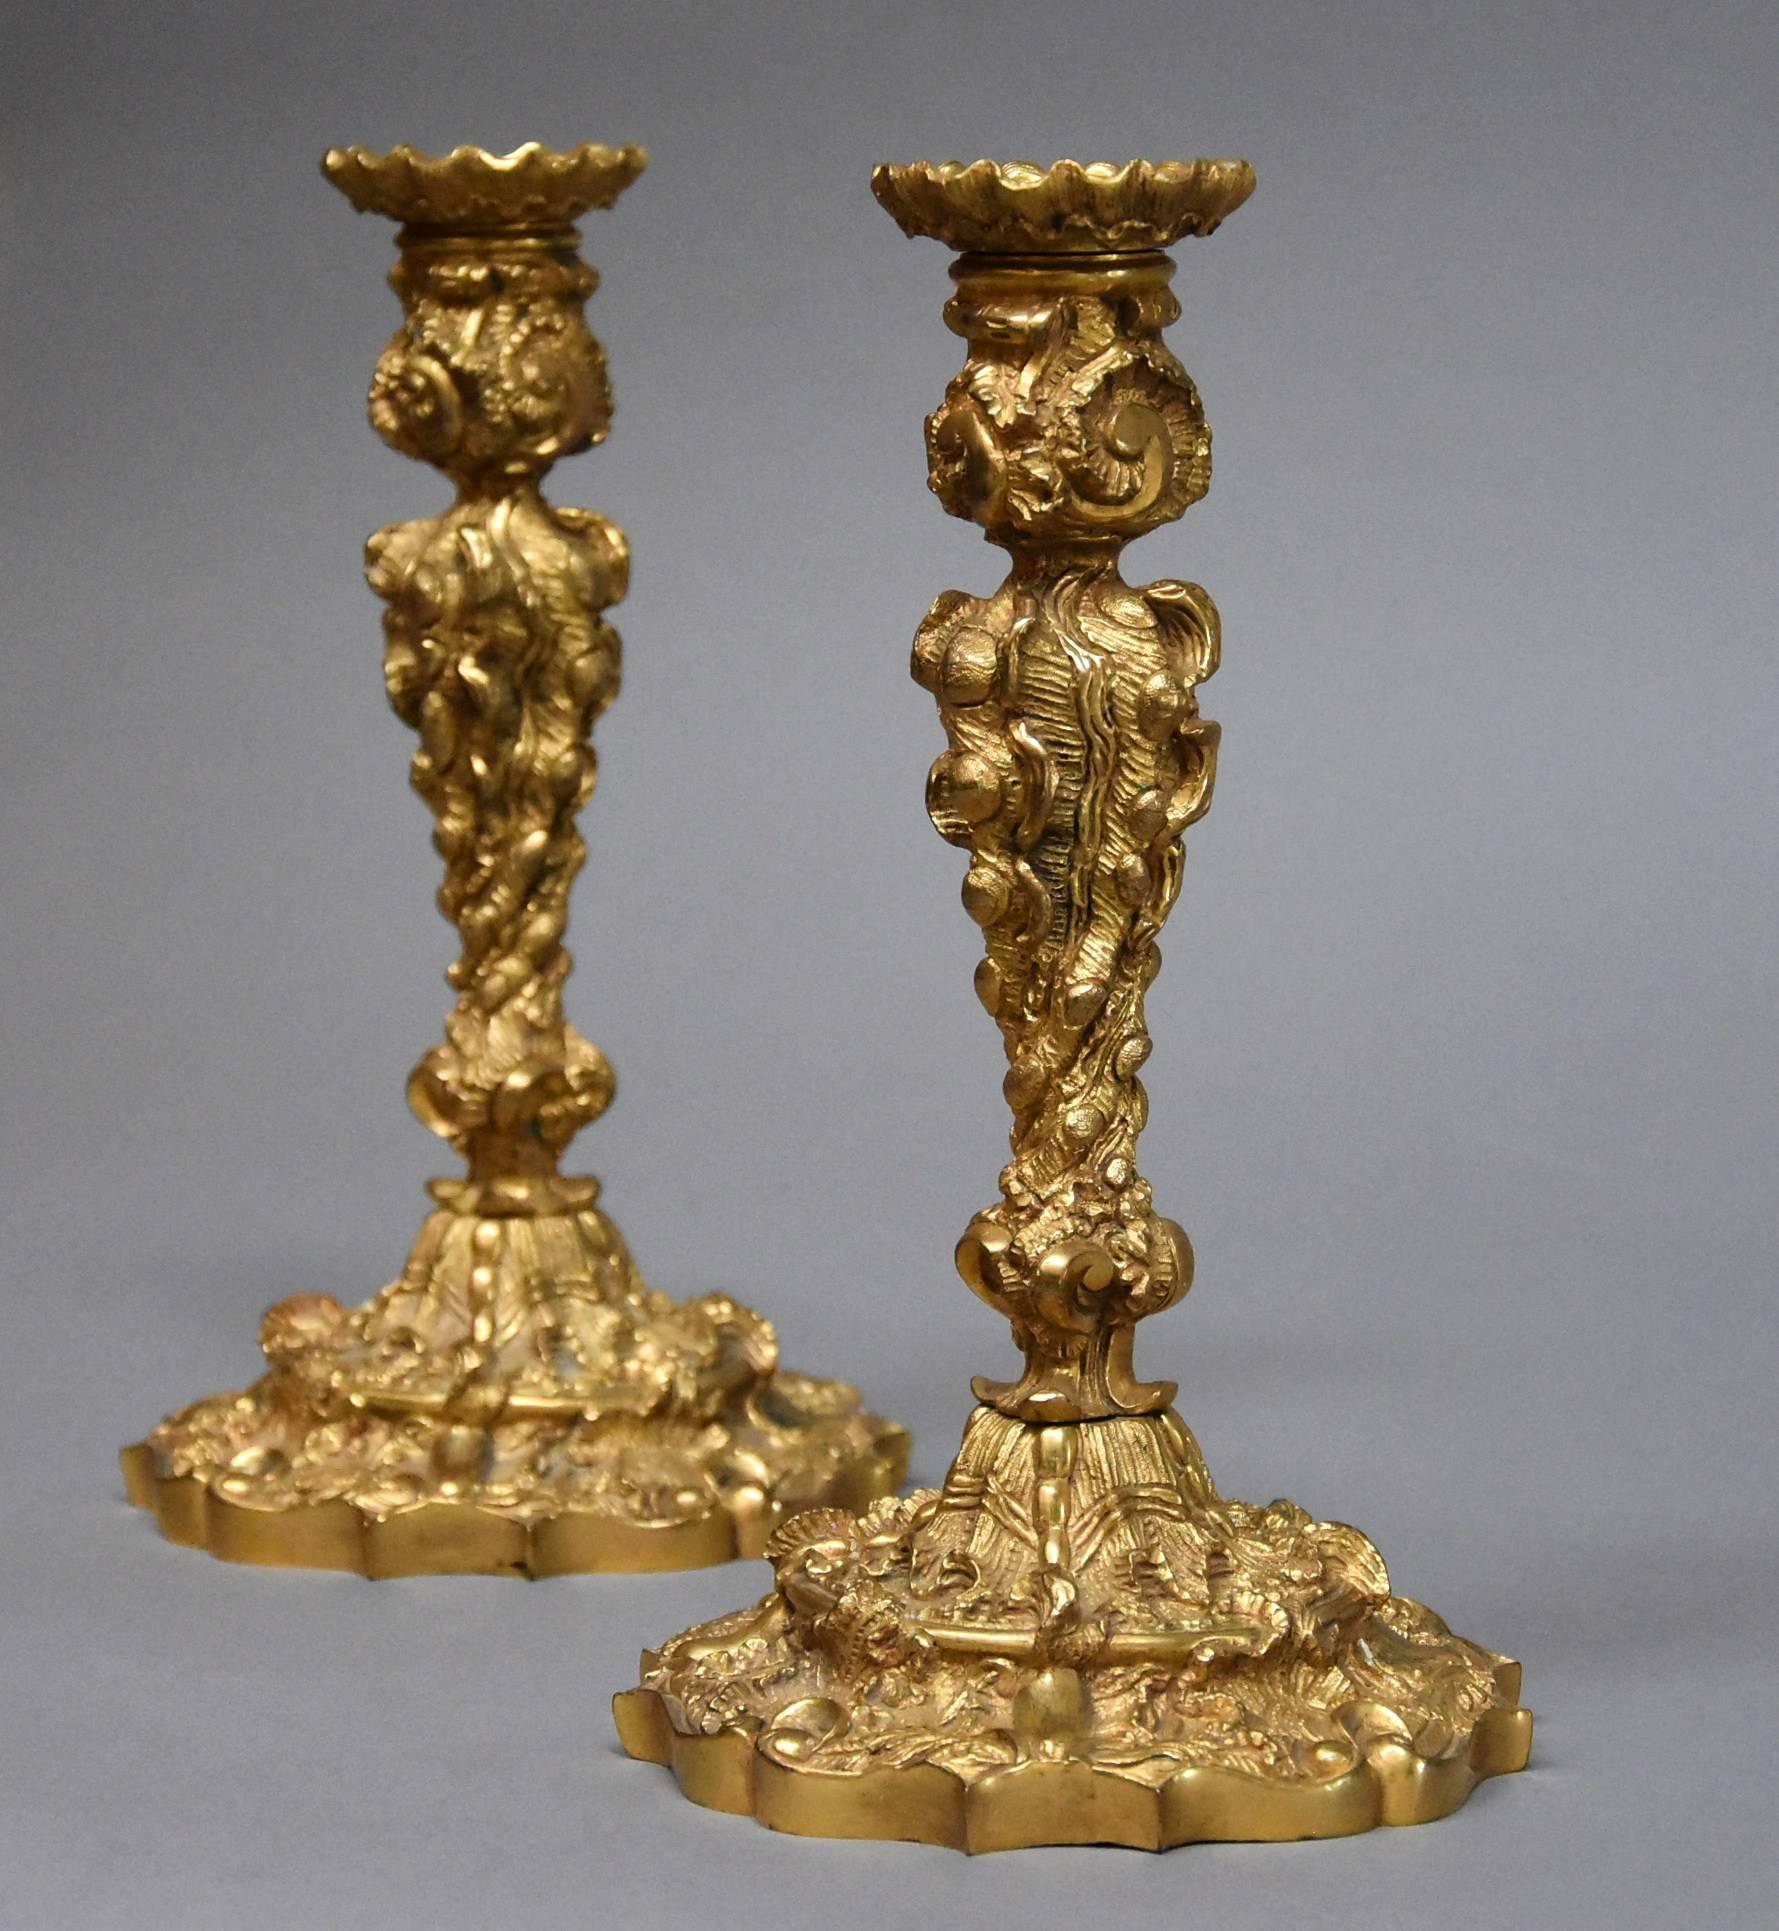 A pair of late 19th century French highly decorative ormolu candlesticks in the Rococo style.

These candlesticks consist of candle holders to the top (these are removable) with scrolling shell decoration.

This leads down to the main body of